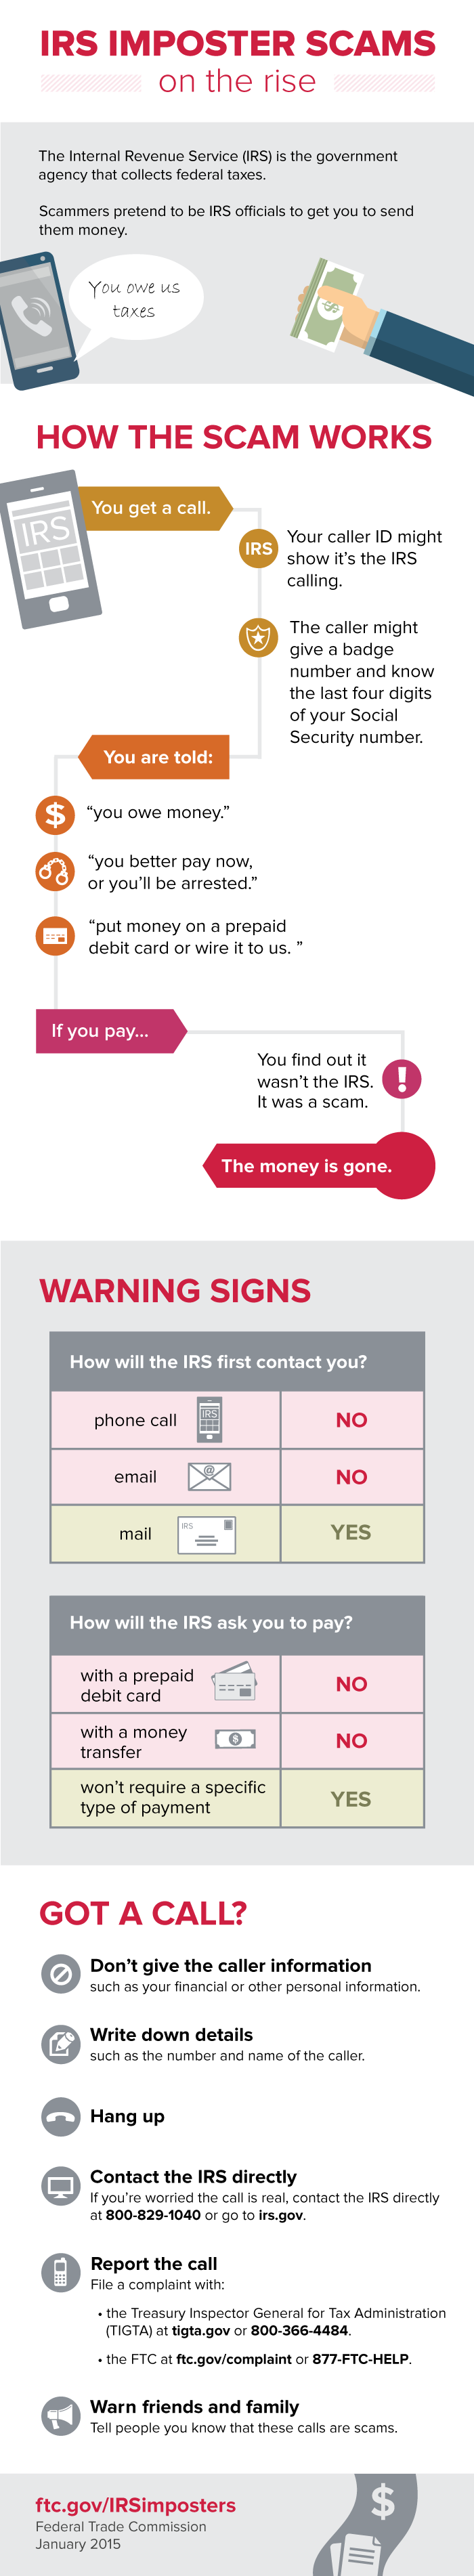 IRS Imposter Scams